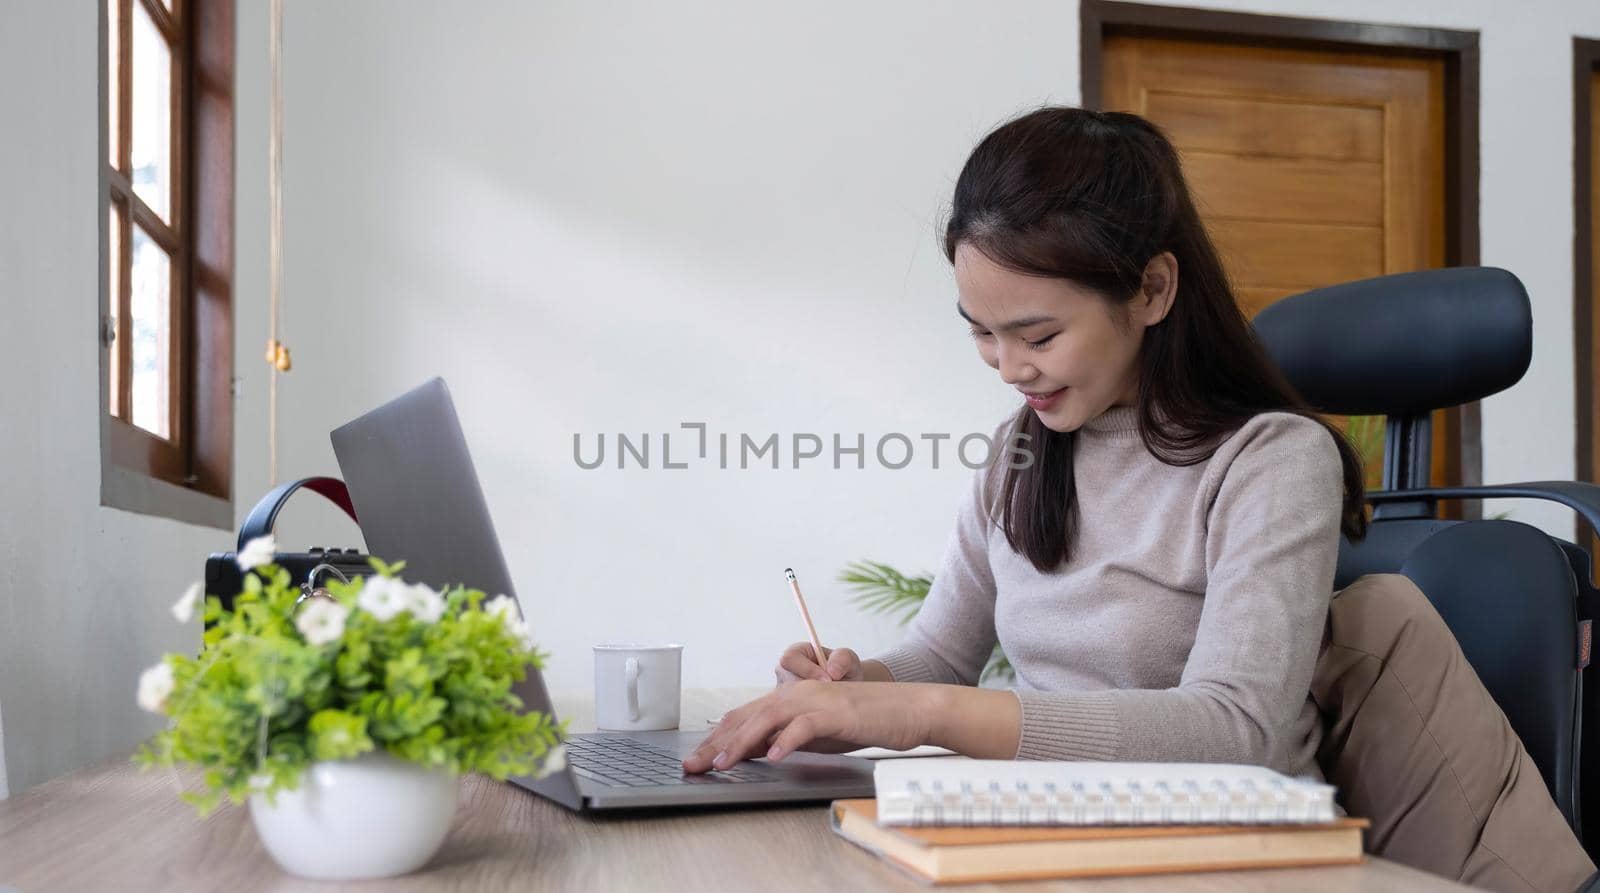 Beautiful woman writing taking notes while sitting in front her computer laptop at the wooden working table over living room bookshelf as background